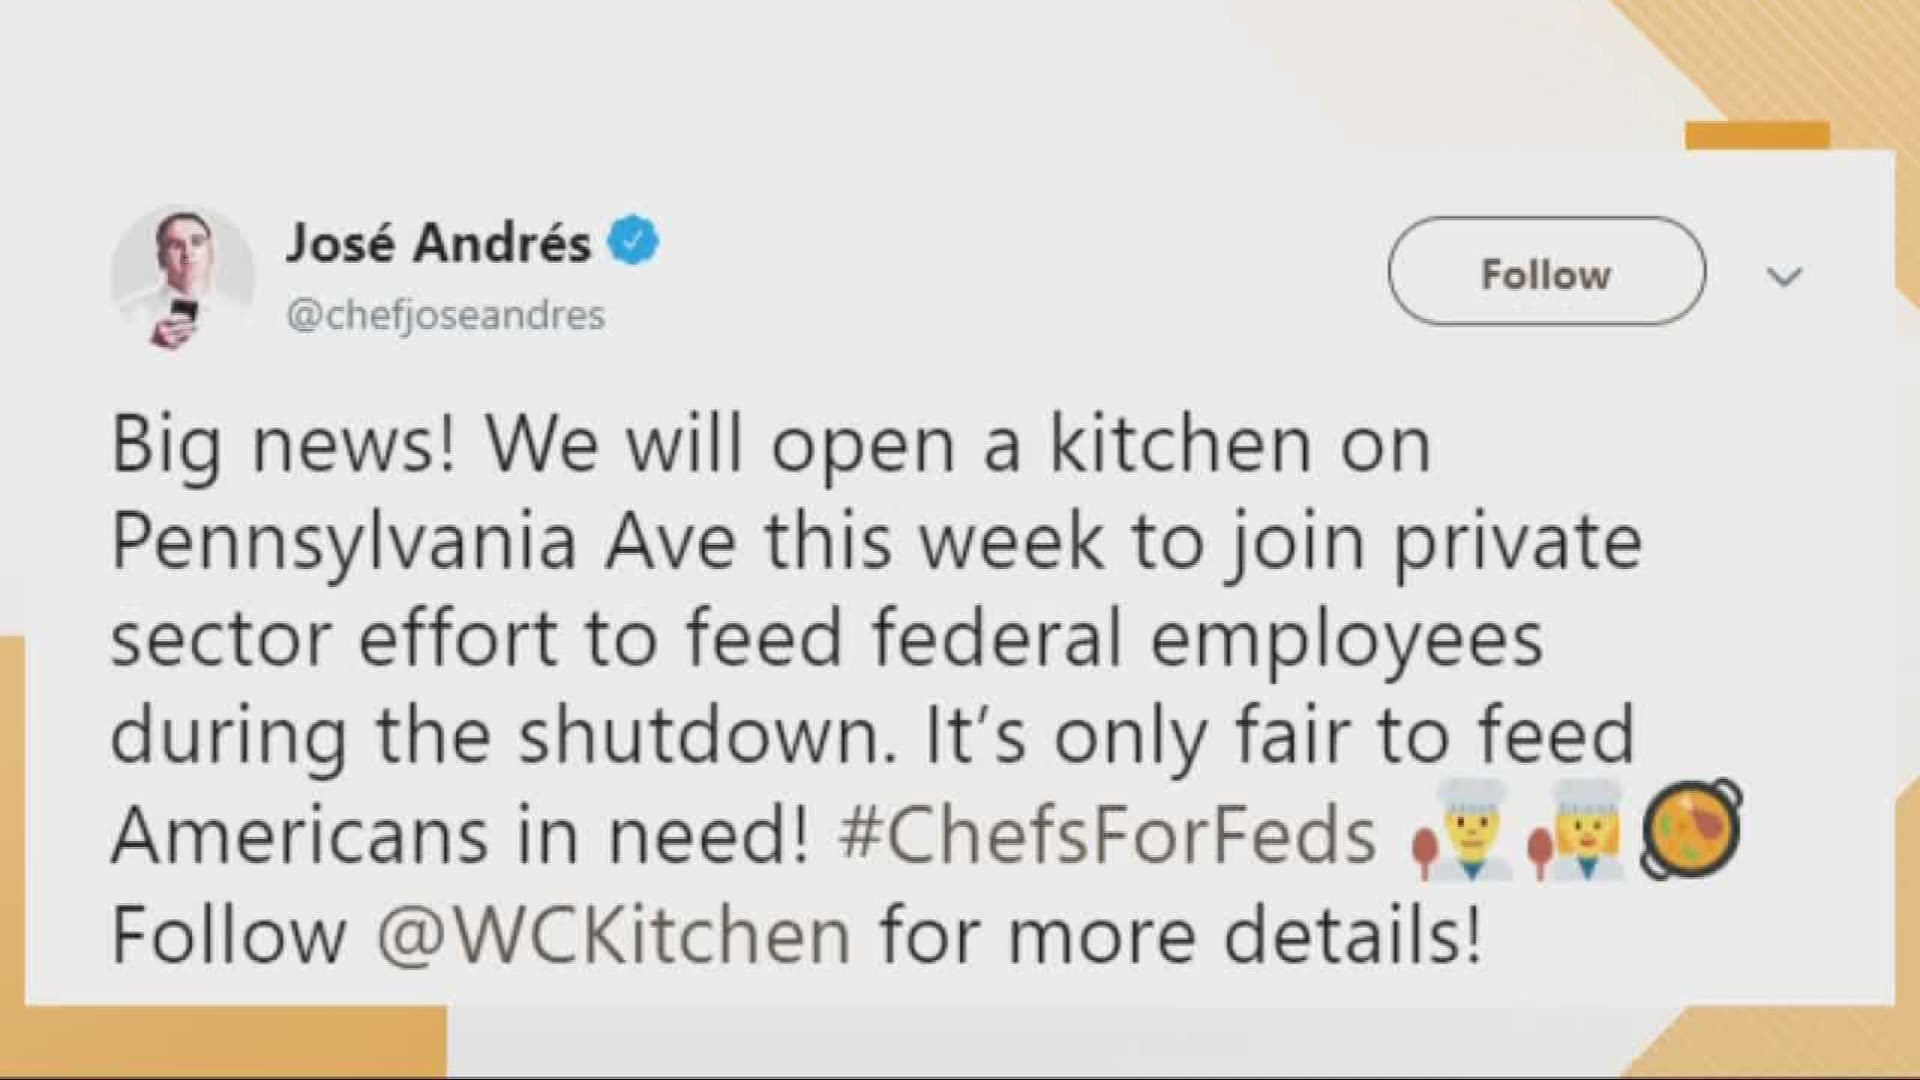 Jose Andres is stepping up again and helping feed furloughed workers.